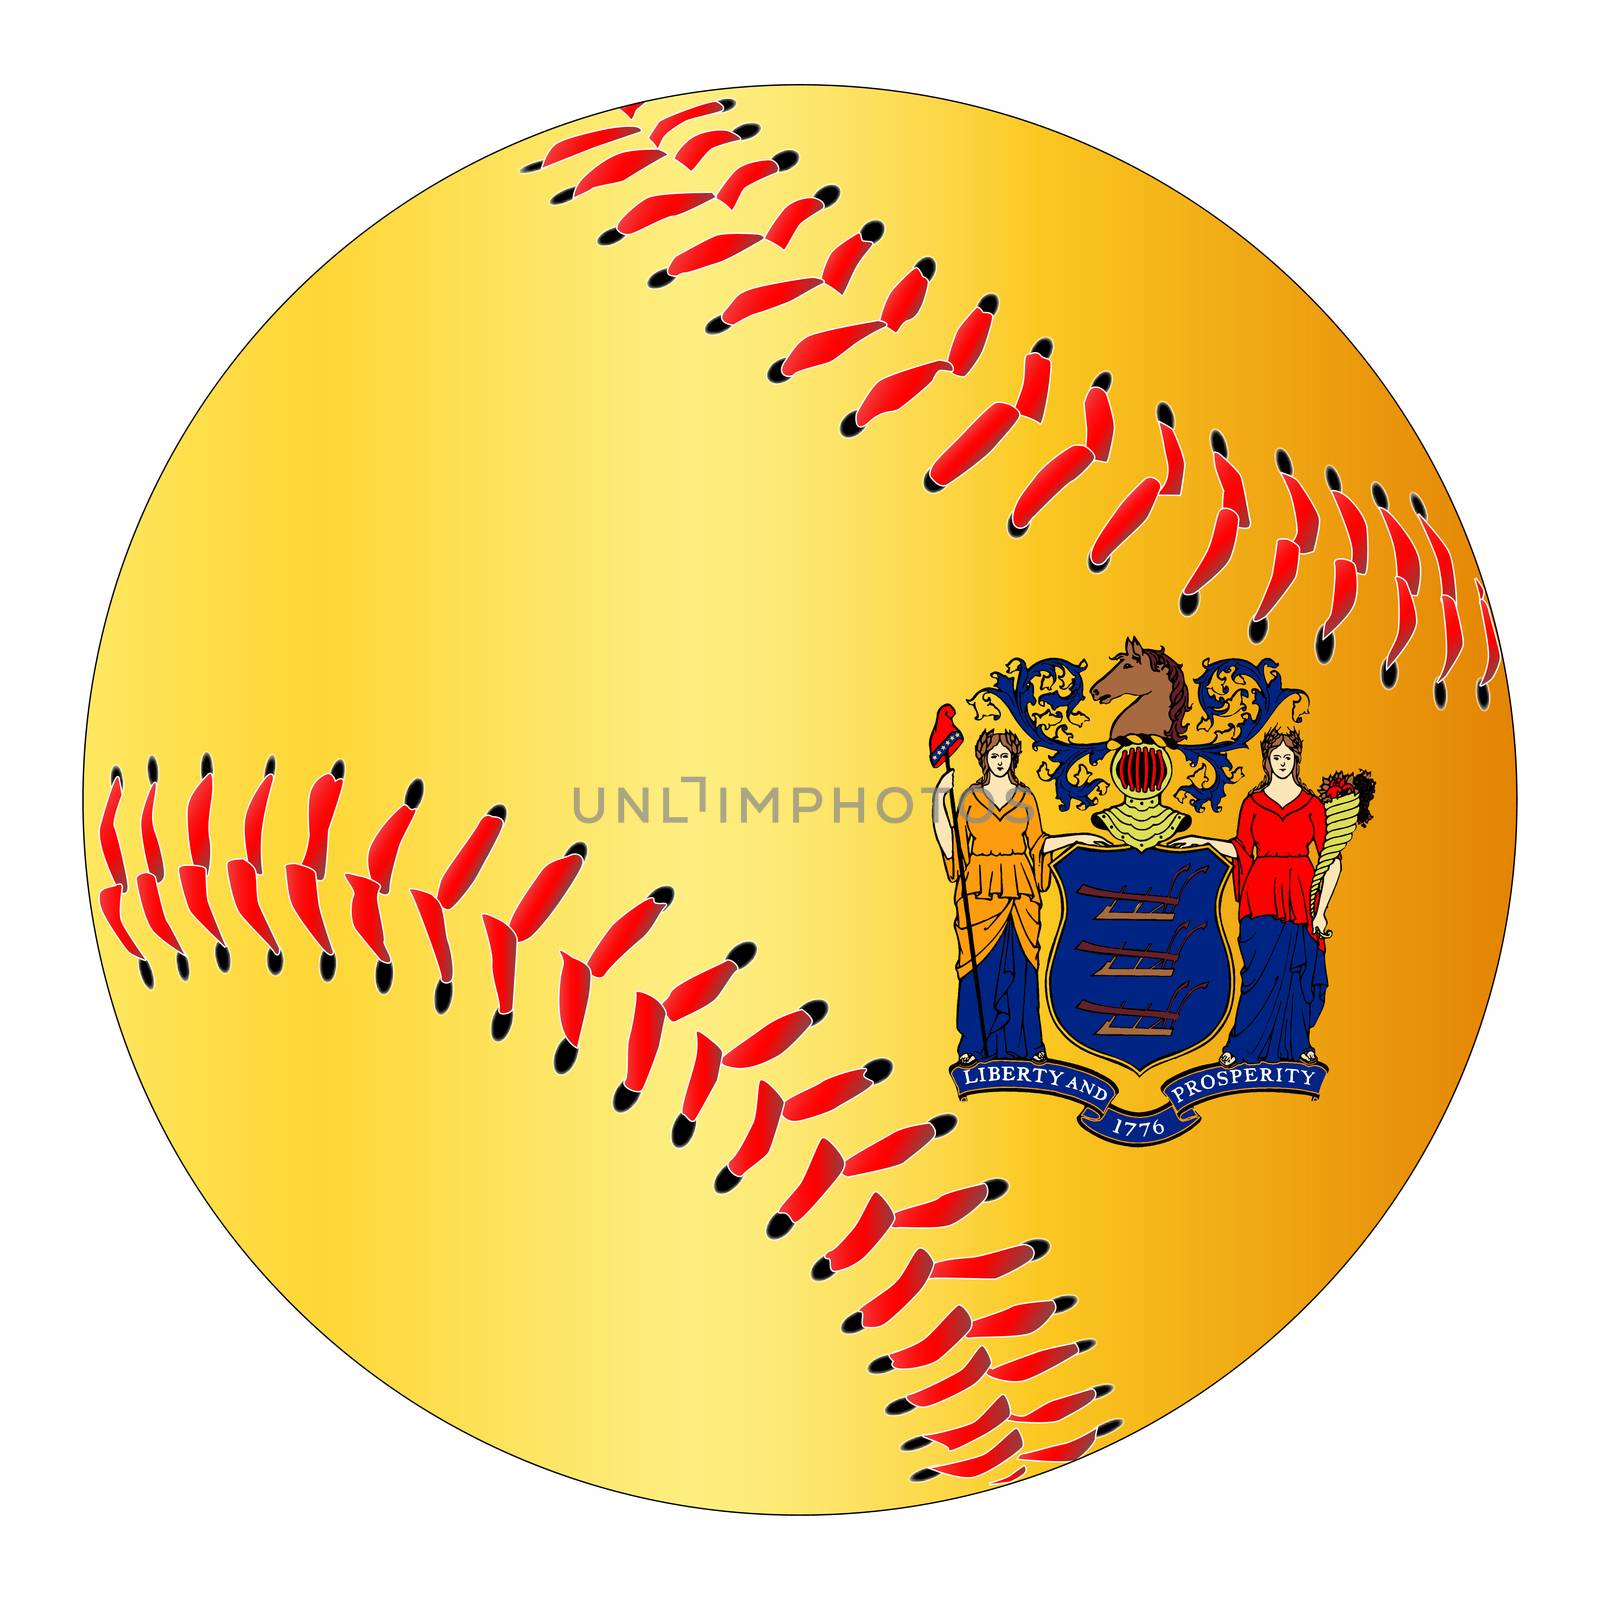 A new white baseball with red stitching with the New Jersey state flag overlay isolated on white